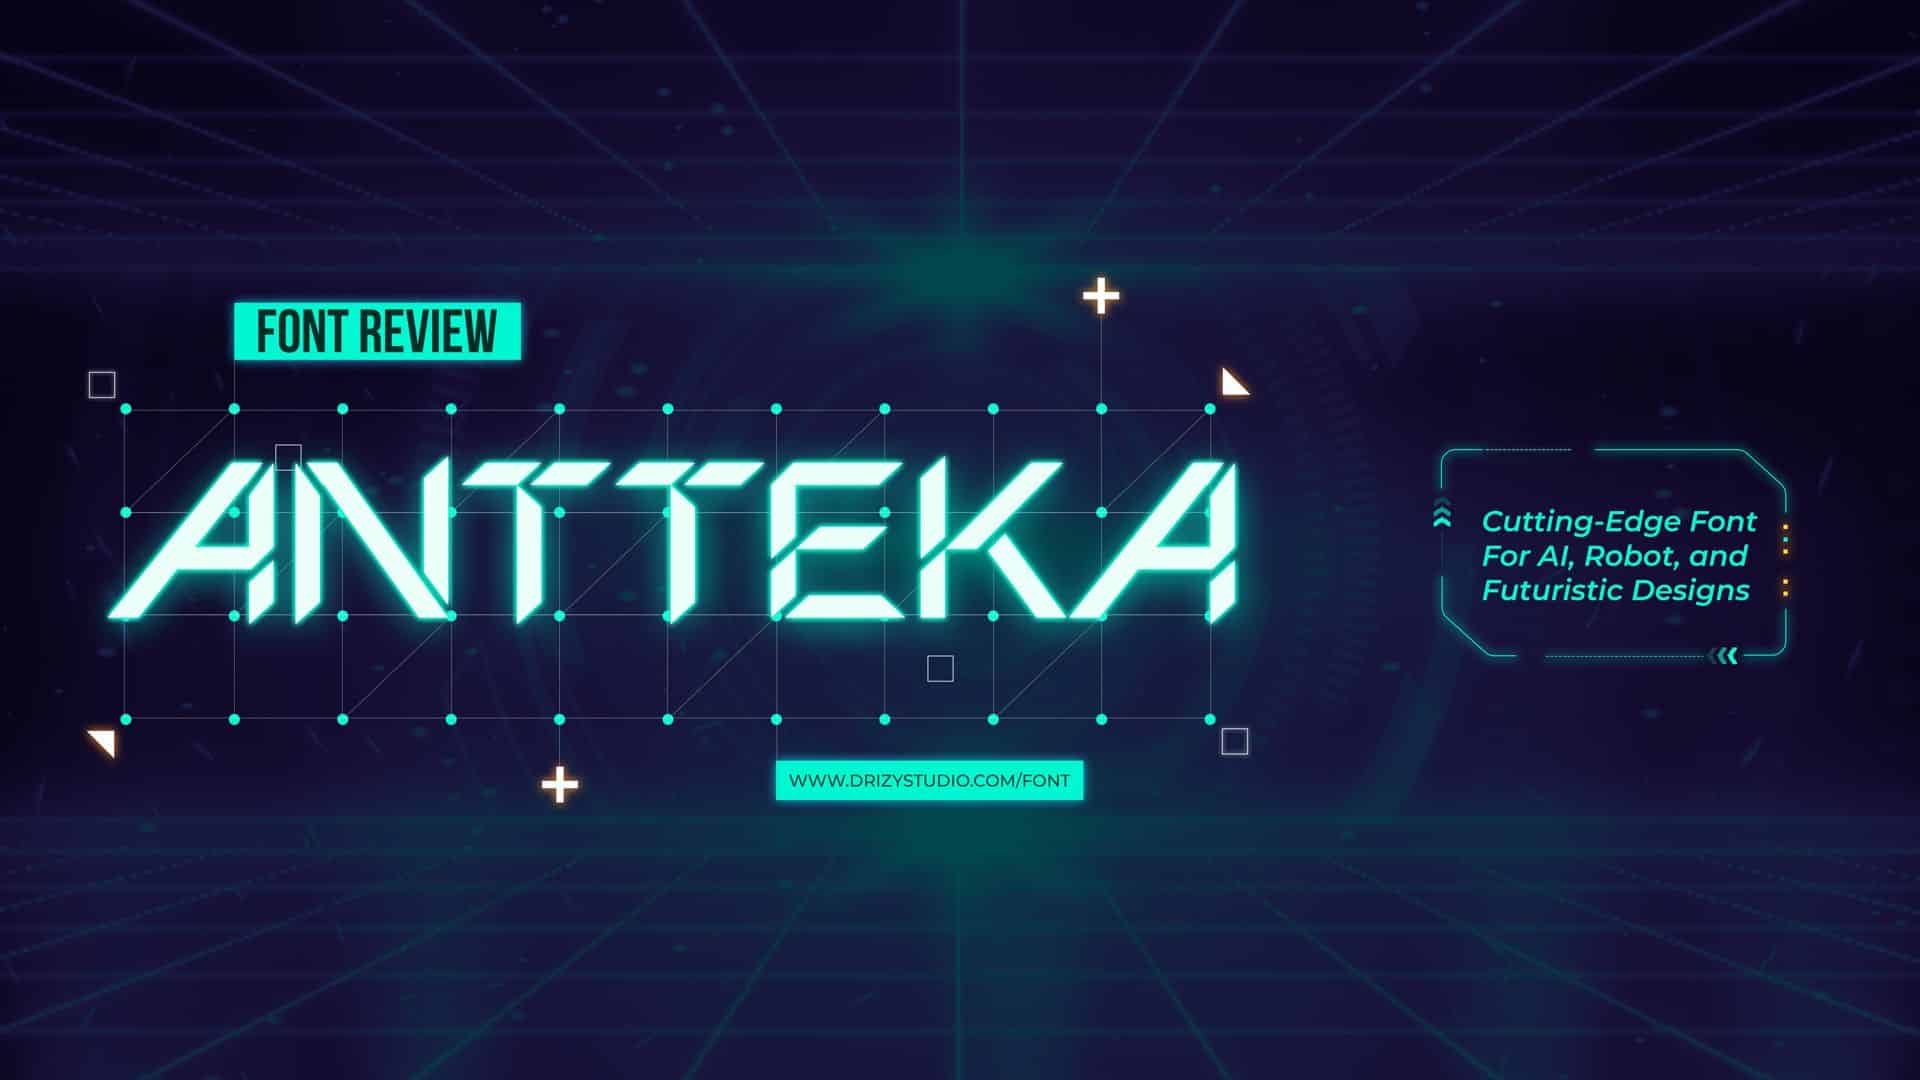 Antteka Font A Cutting Edge Typeface for AI, Robot, and Futuristic Designs